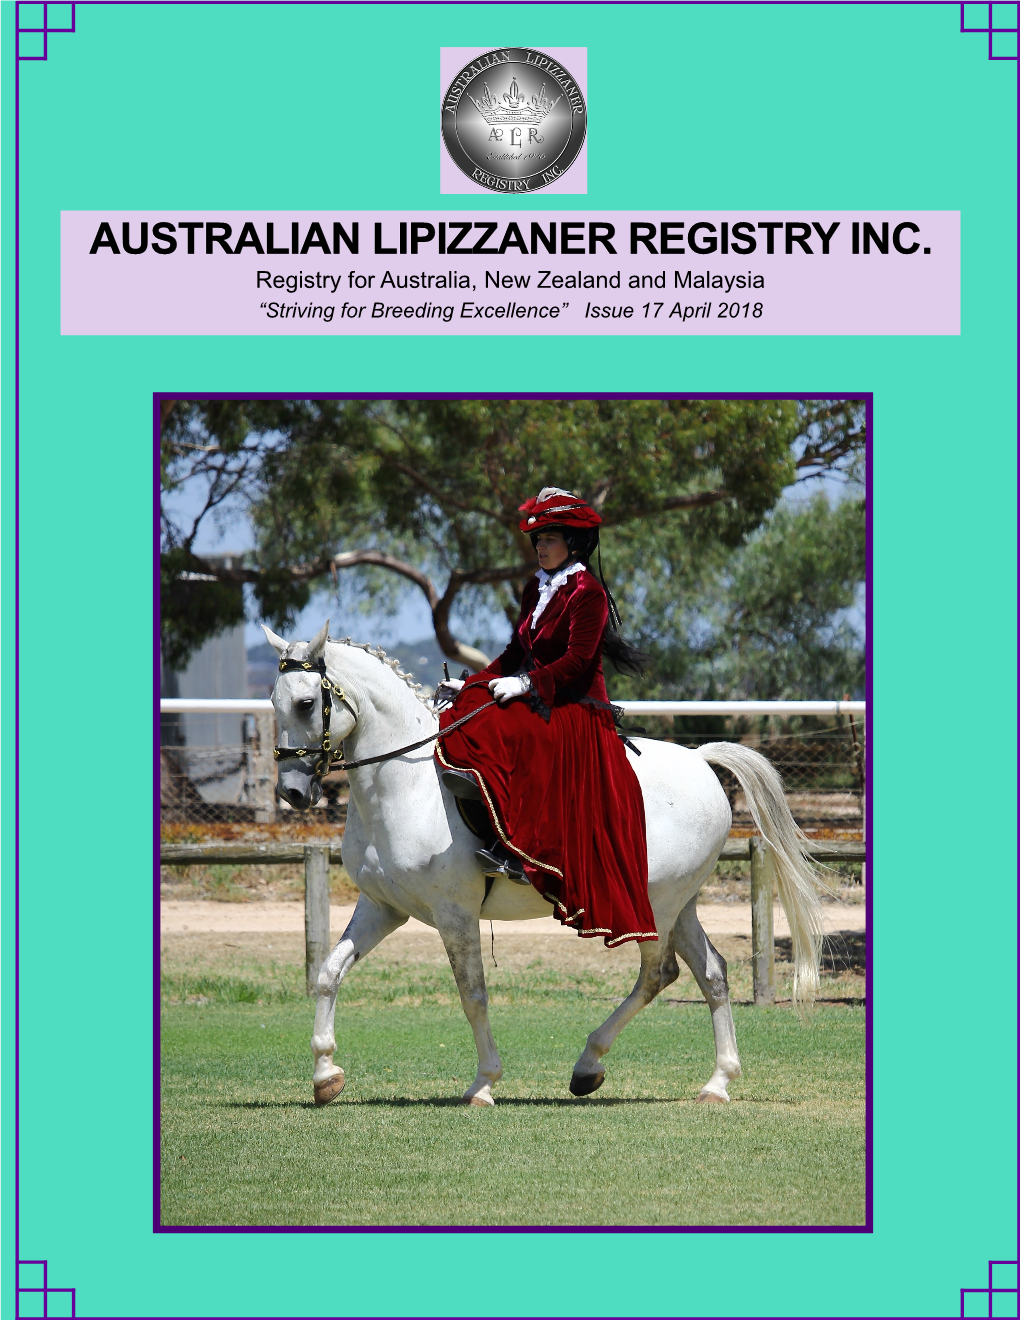 AUSTRALIAN LIPIZZANER REGISTRY INC. Registry for Australia, New Zealand and Malaysia “Striving for Breeding Excellence” Issue 17 April 2018